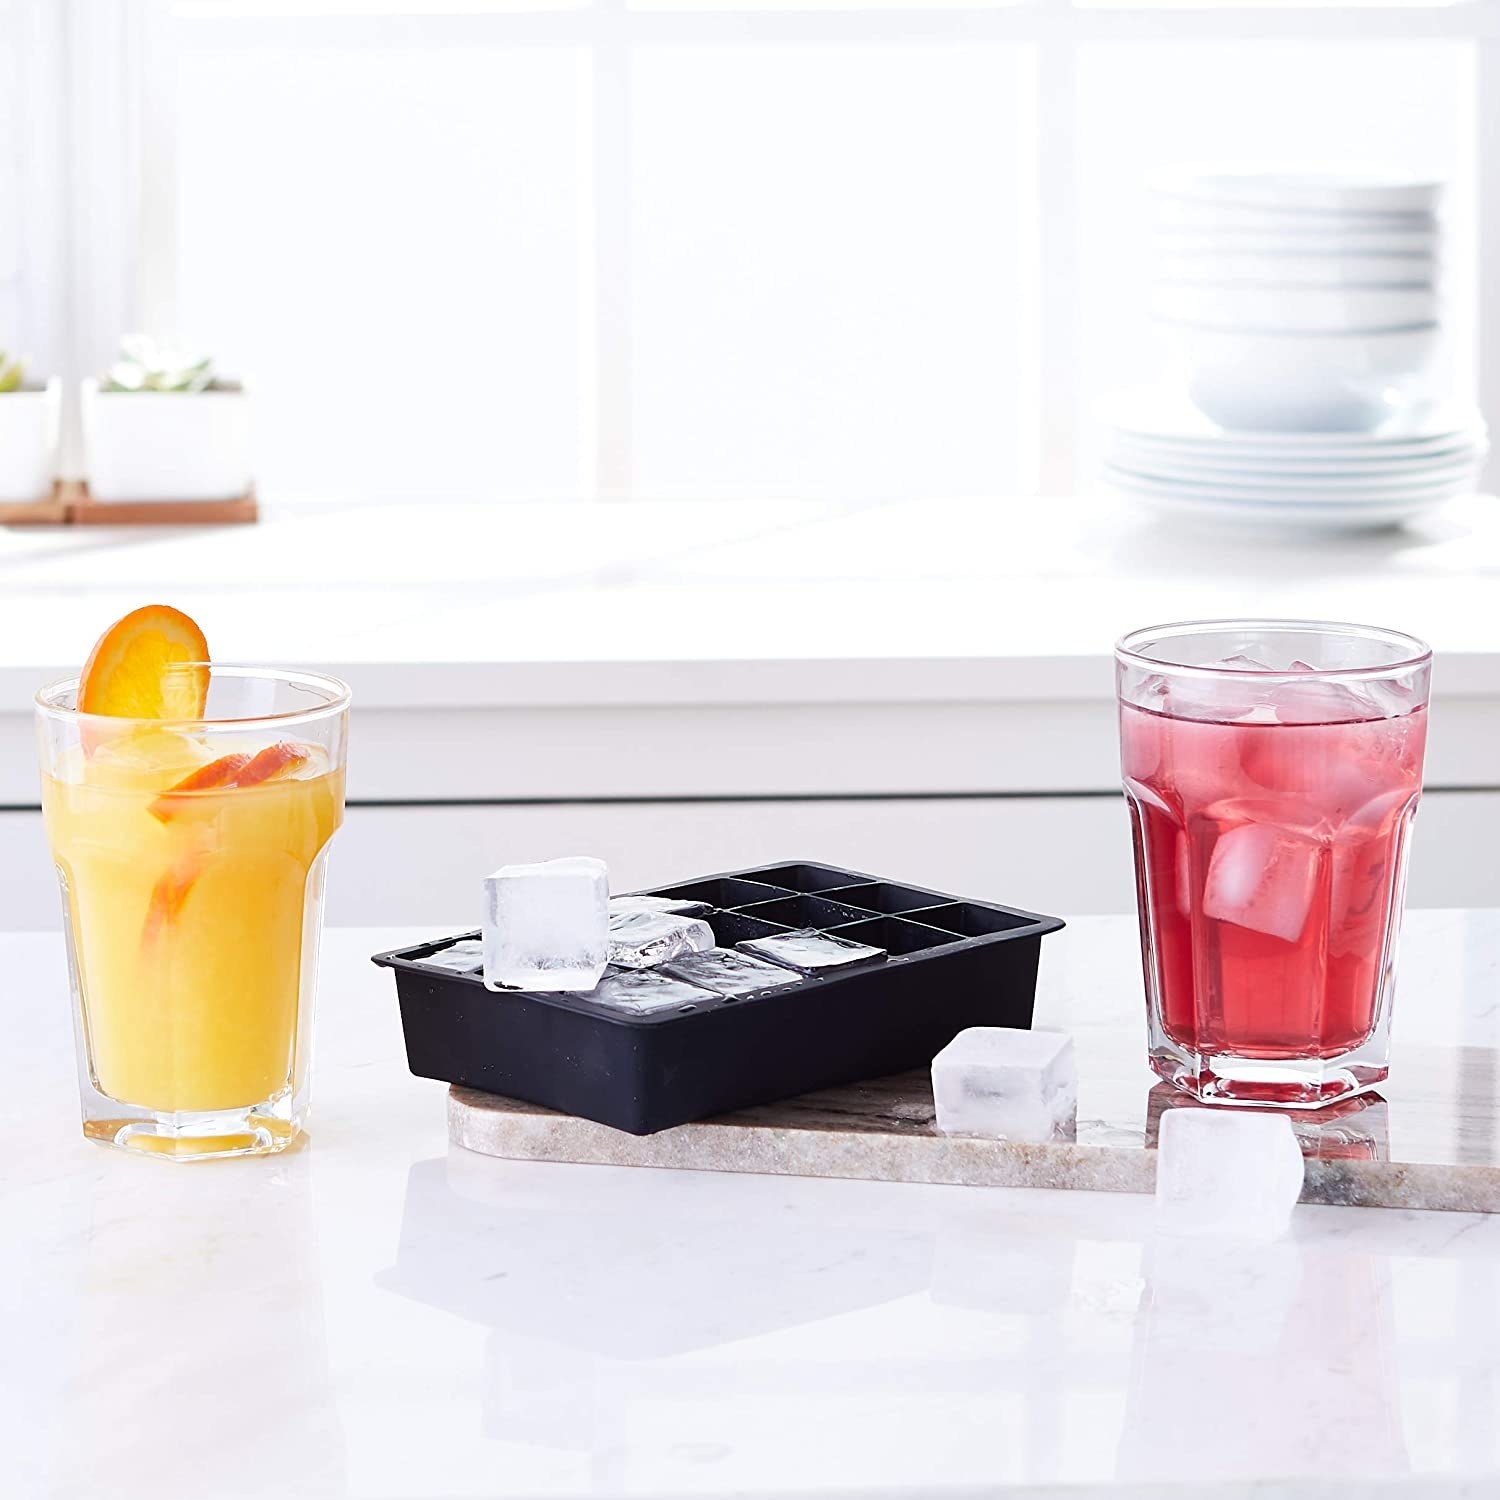 A black silicone ice cube tray with ice cubes surrounding it and two glasses with drinks in them